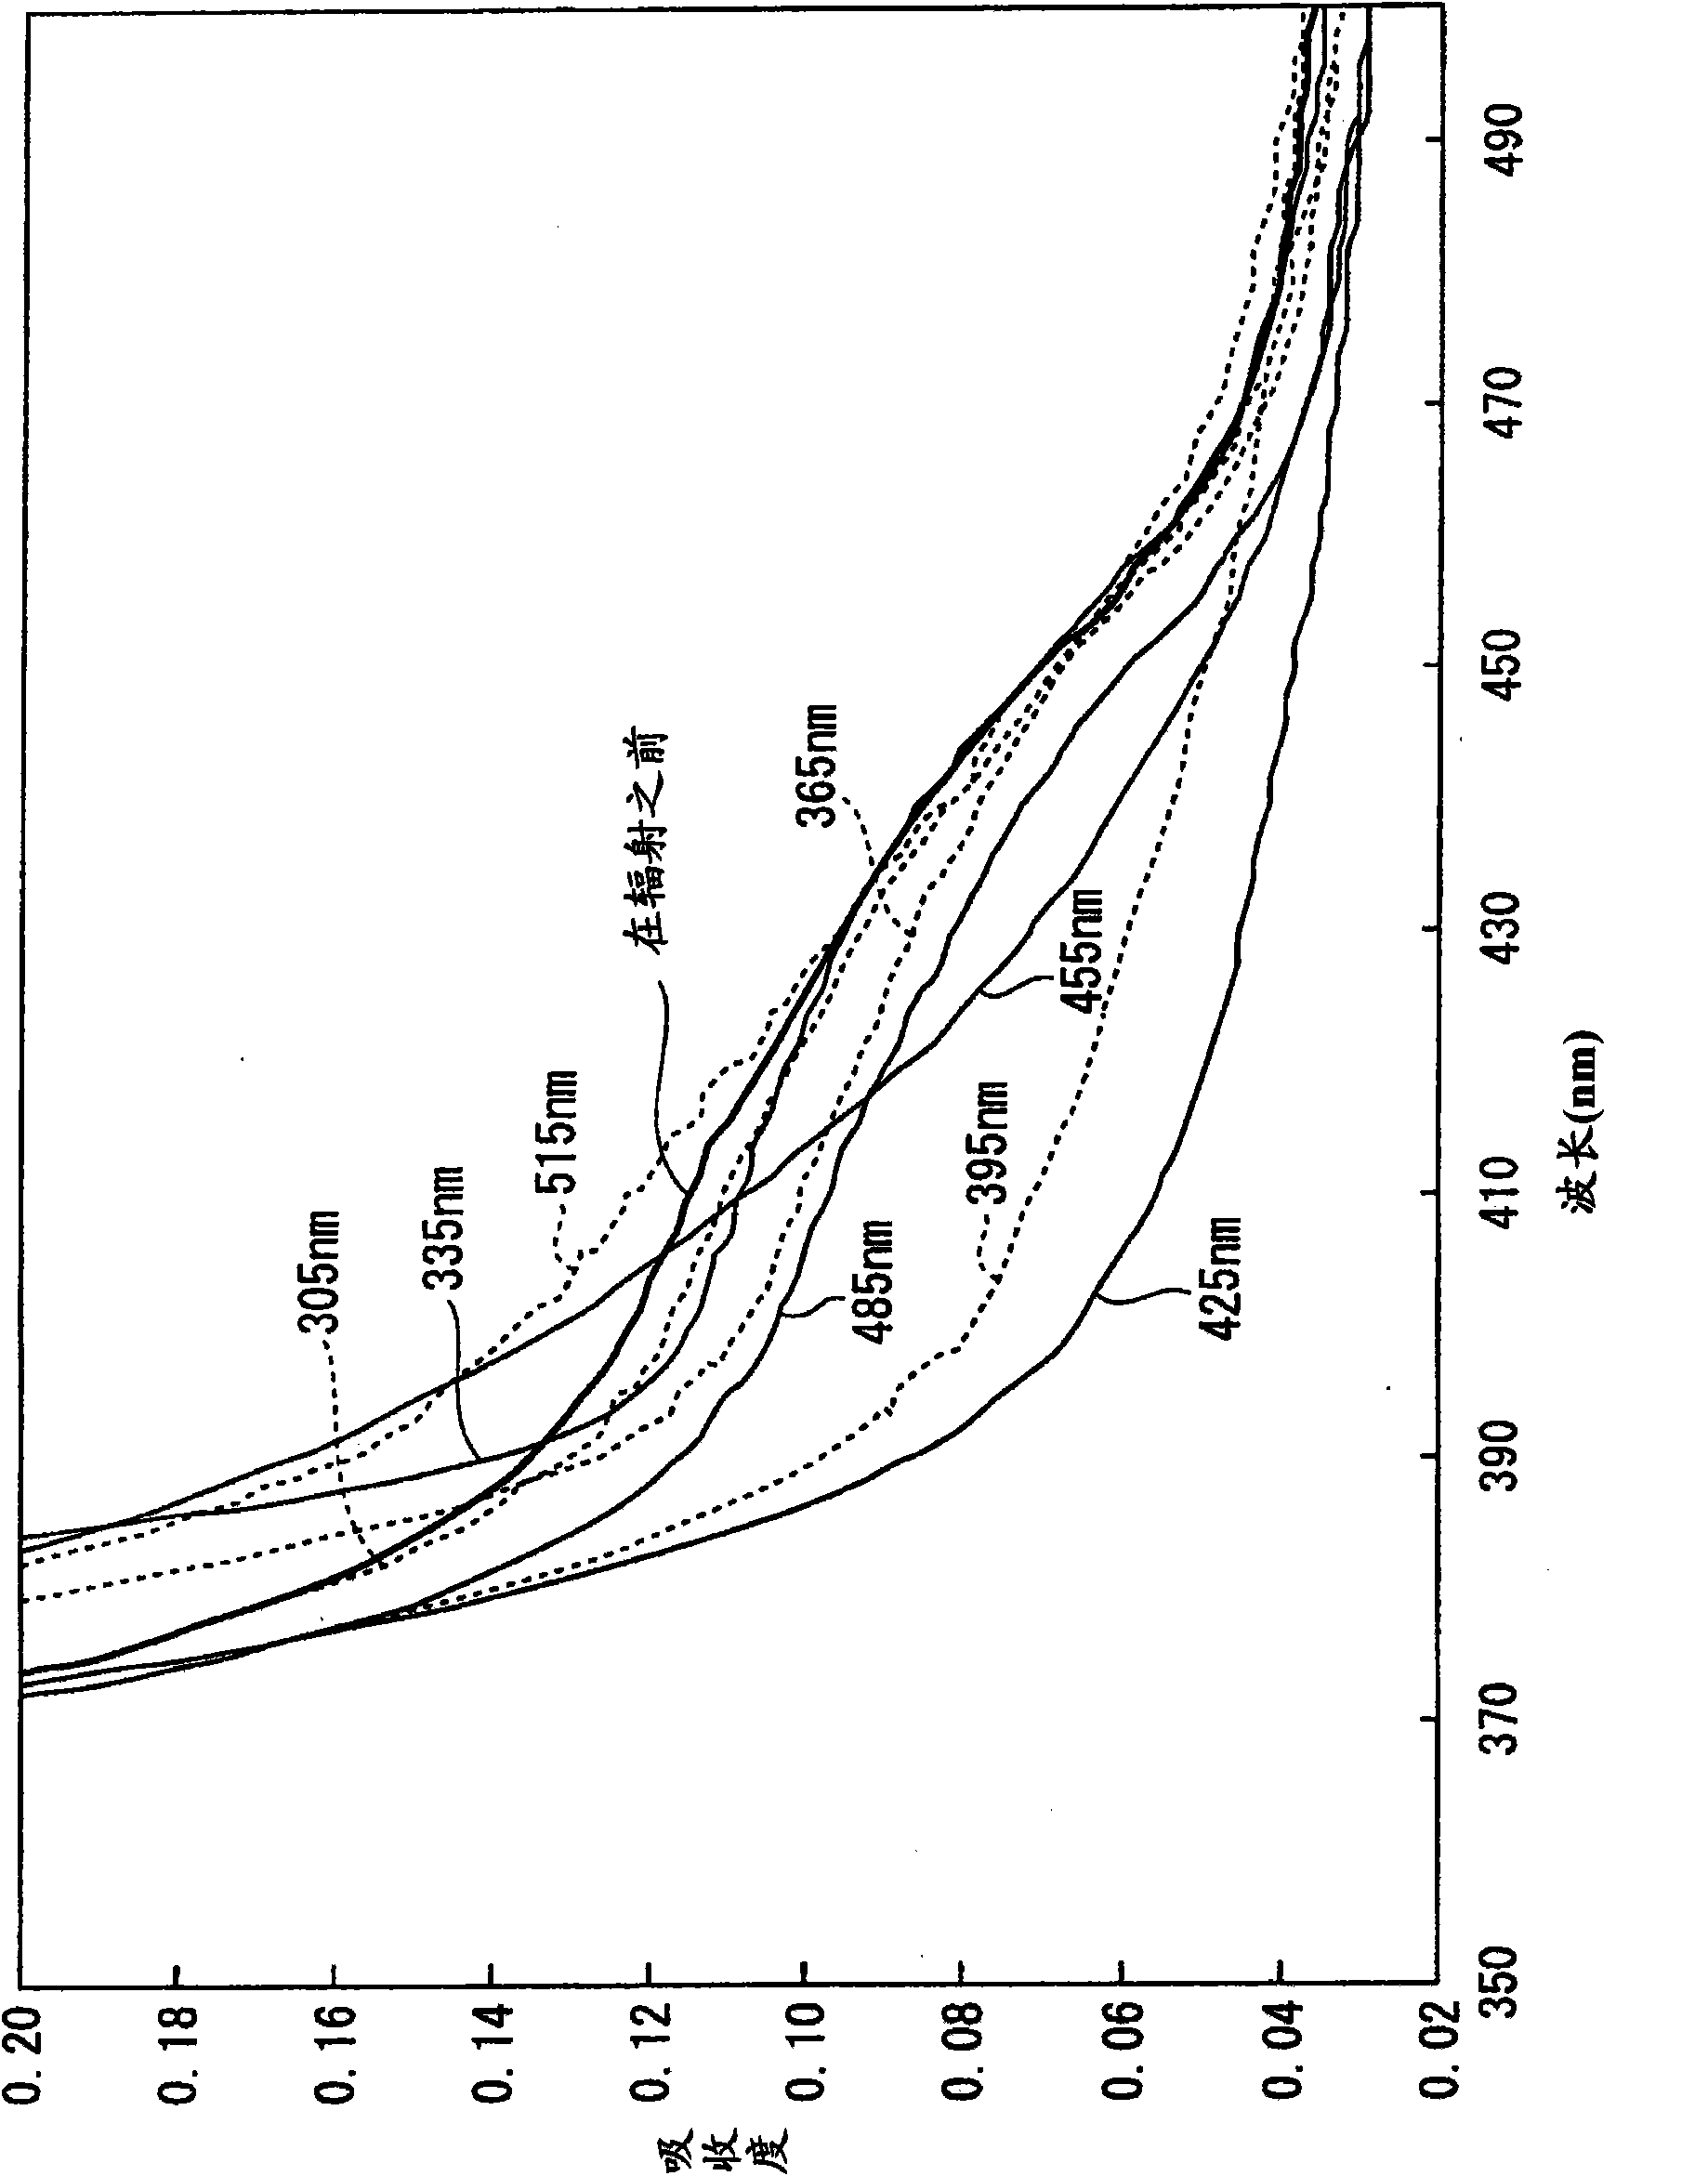 Method of producing n-propyl acetate and allyl acetate